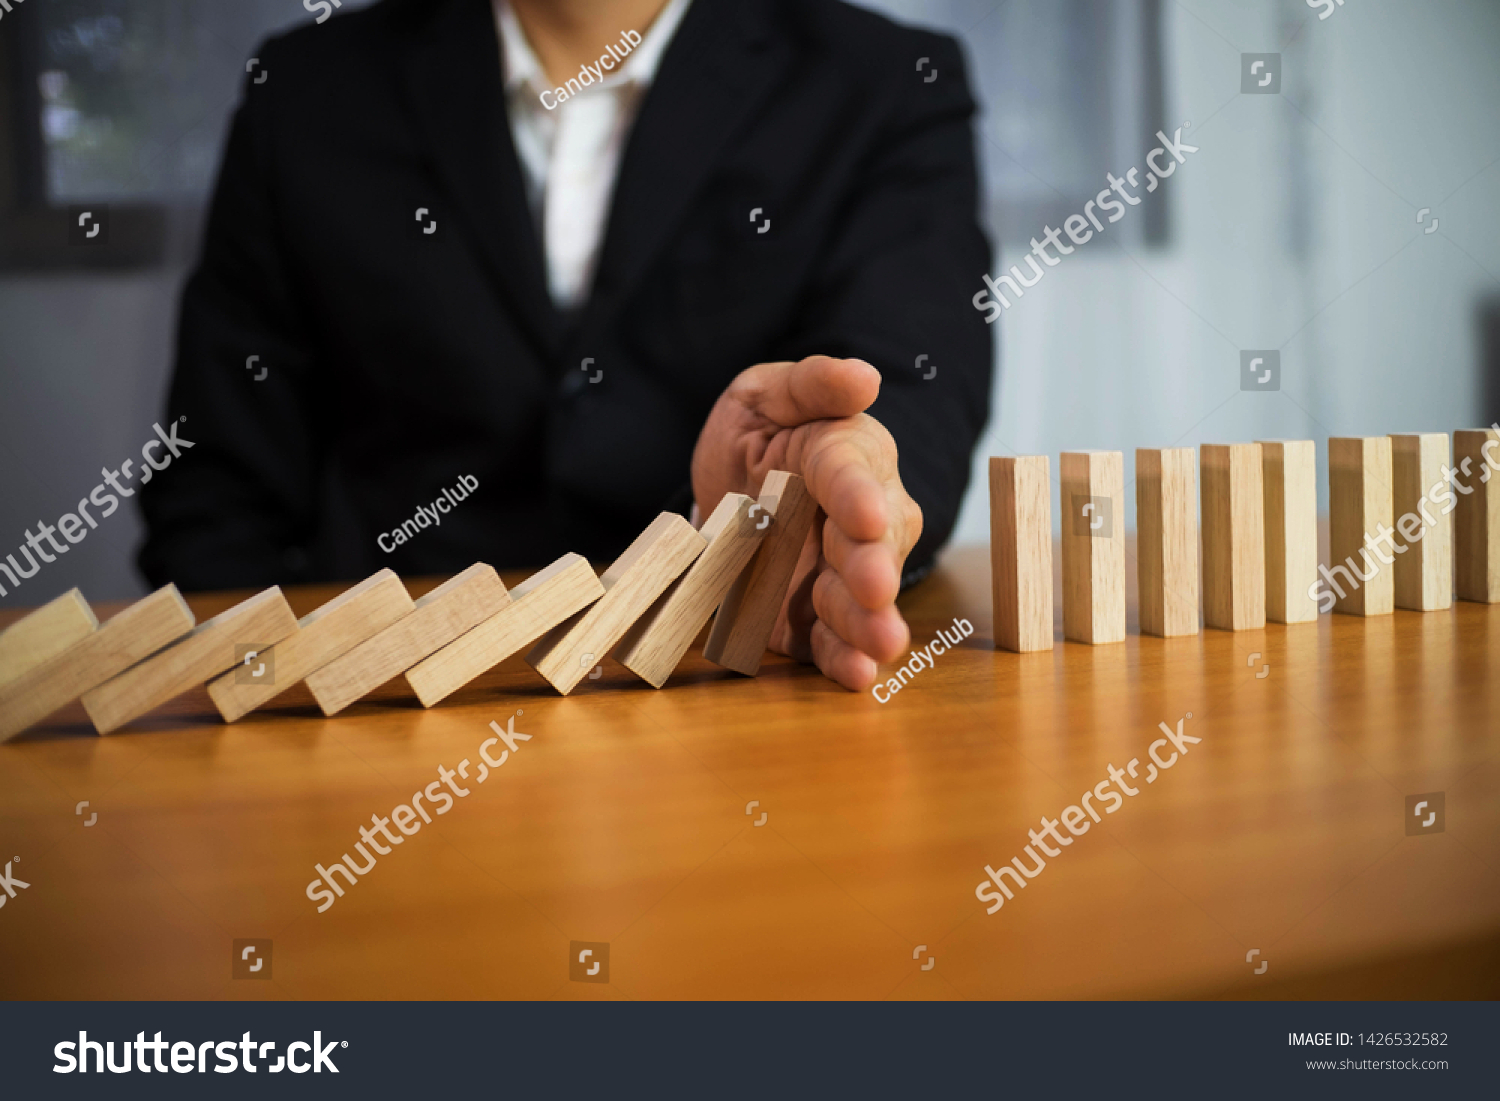 Businessman hand stops domino continuous overturned meaning that hindered business failure. Stop over this business failure concept. #1426532582